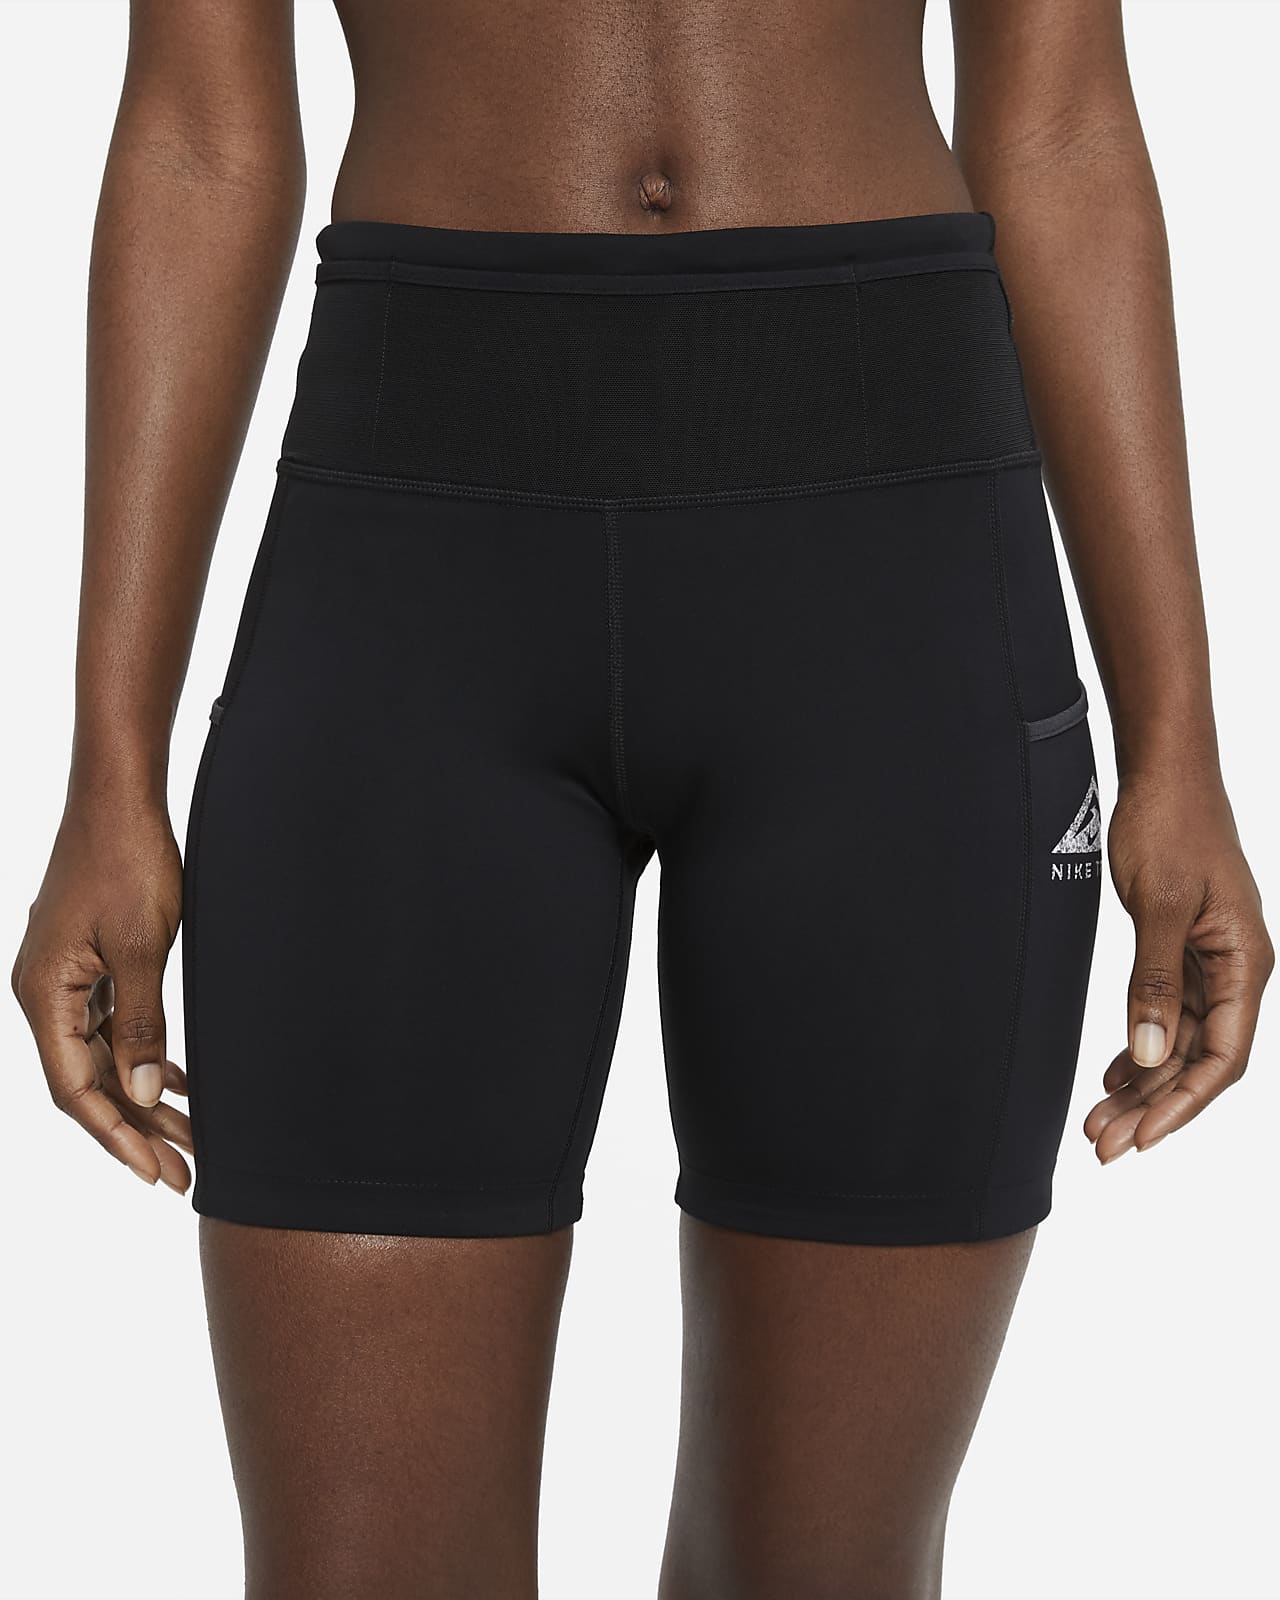 Buy > nike epic lux shorts > in stock